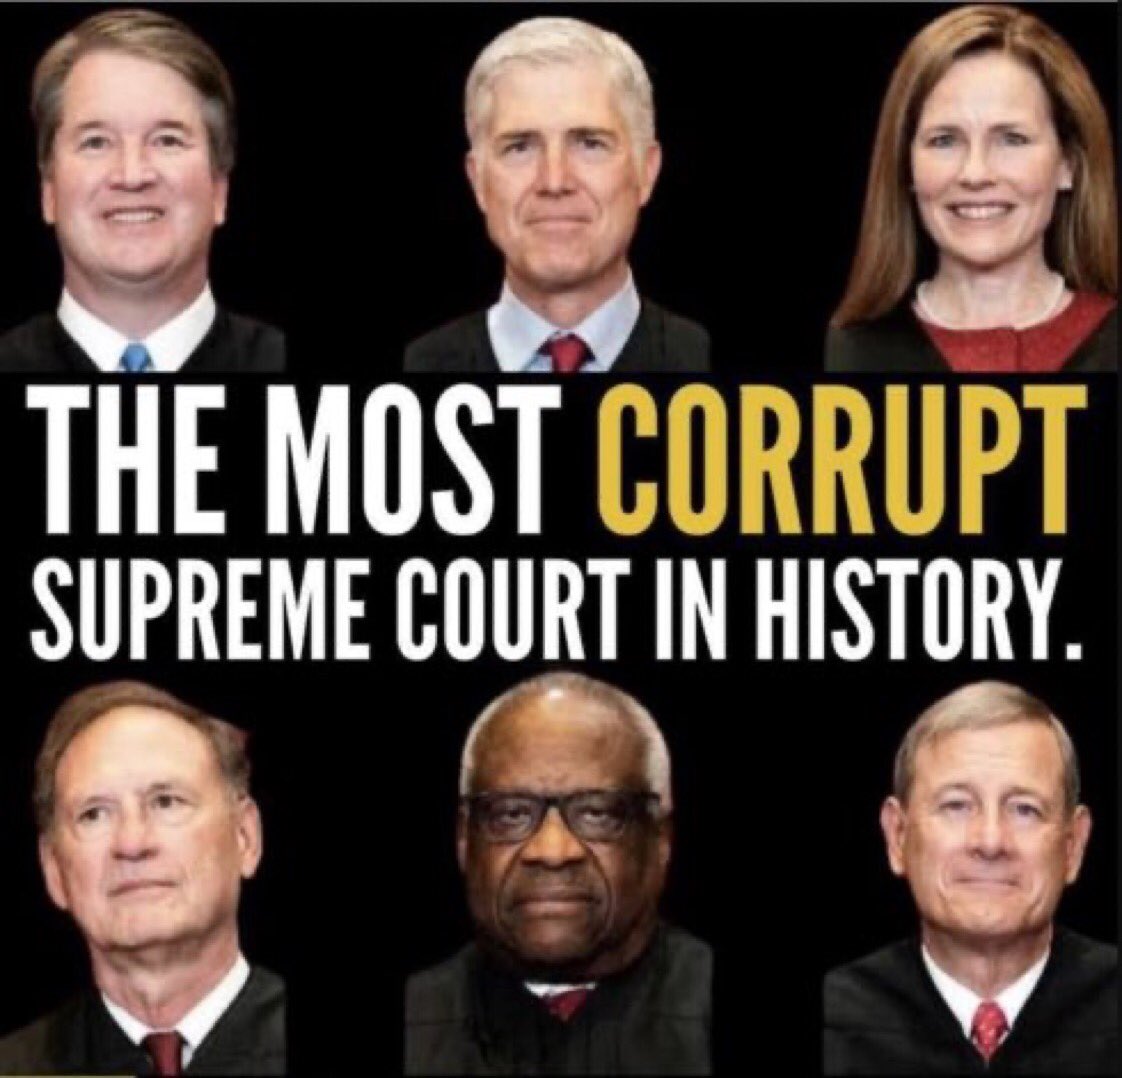 #DemsUnited #ProudBlue #Fresh I can’t remember the last time these six did anything that would give credibility to the once respected SCOTUS. We know at least three lied under oath. We know several should have recused themselves regarding issues that they were involved in.